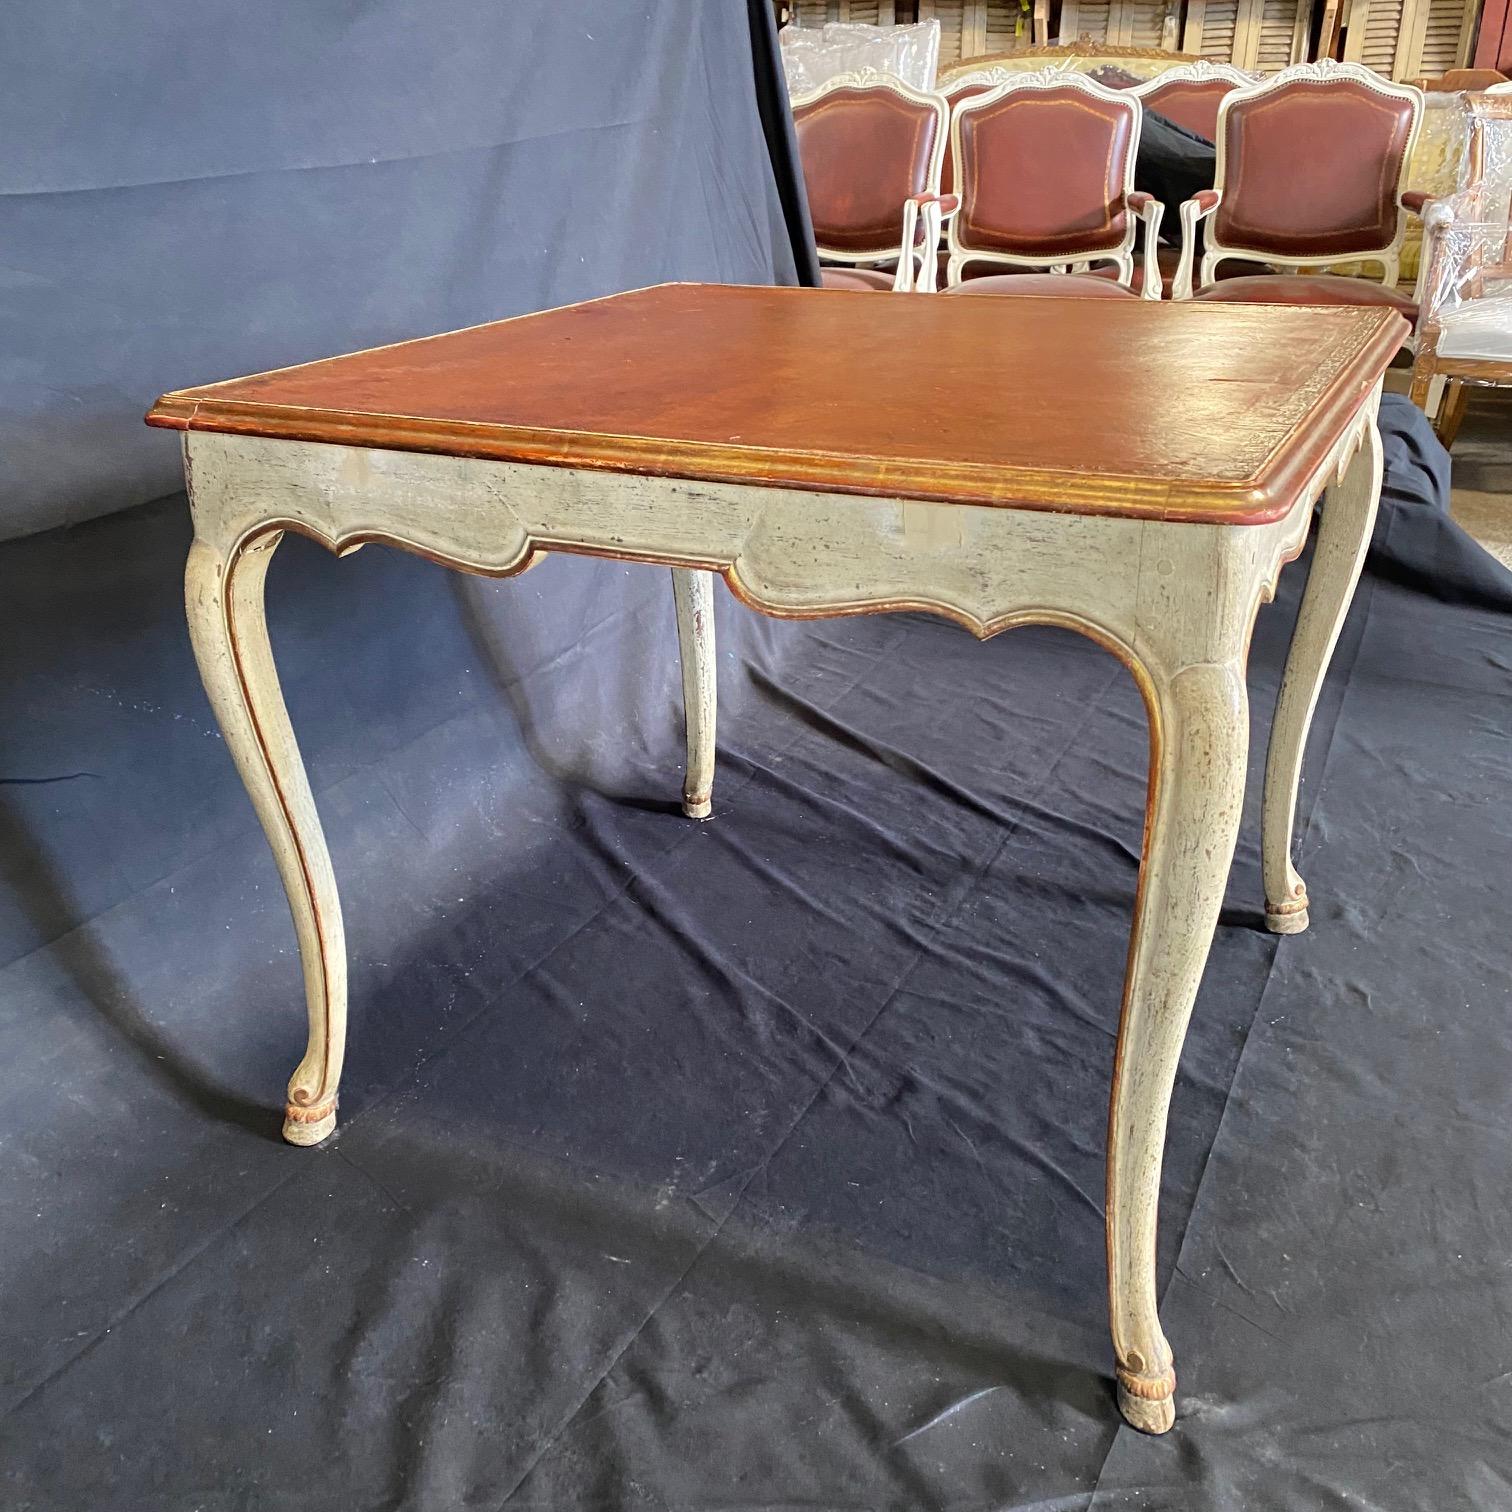 Antique French walnut leather top table was sculpted from fine French walnut, the contoured and beveled top which is square, frames a lovely brown leather surface with tooled gold bordering. The relatively shallow apron over four gracefully carved